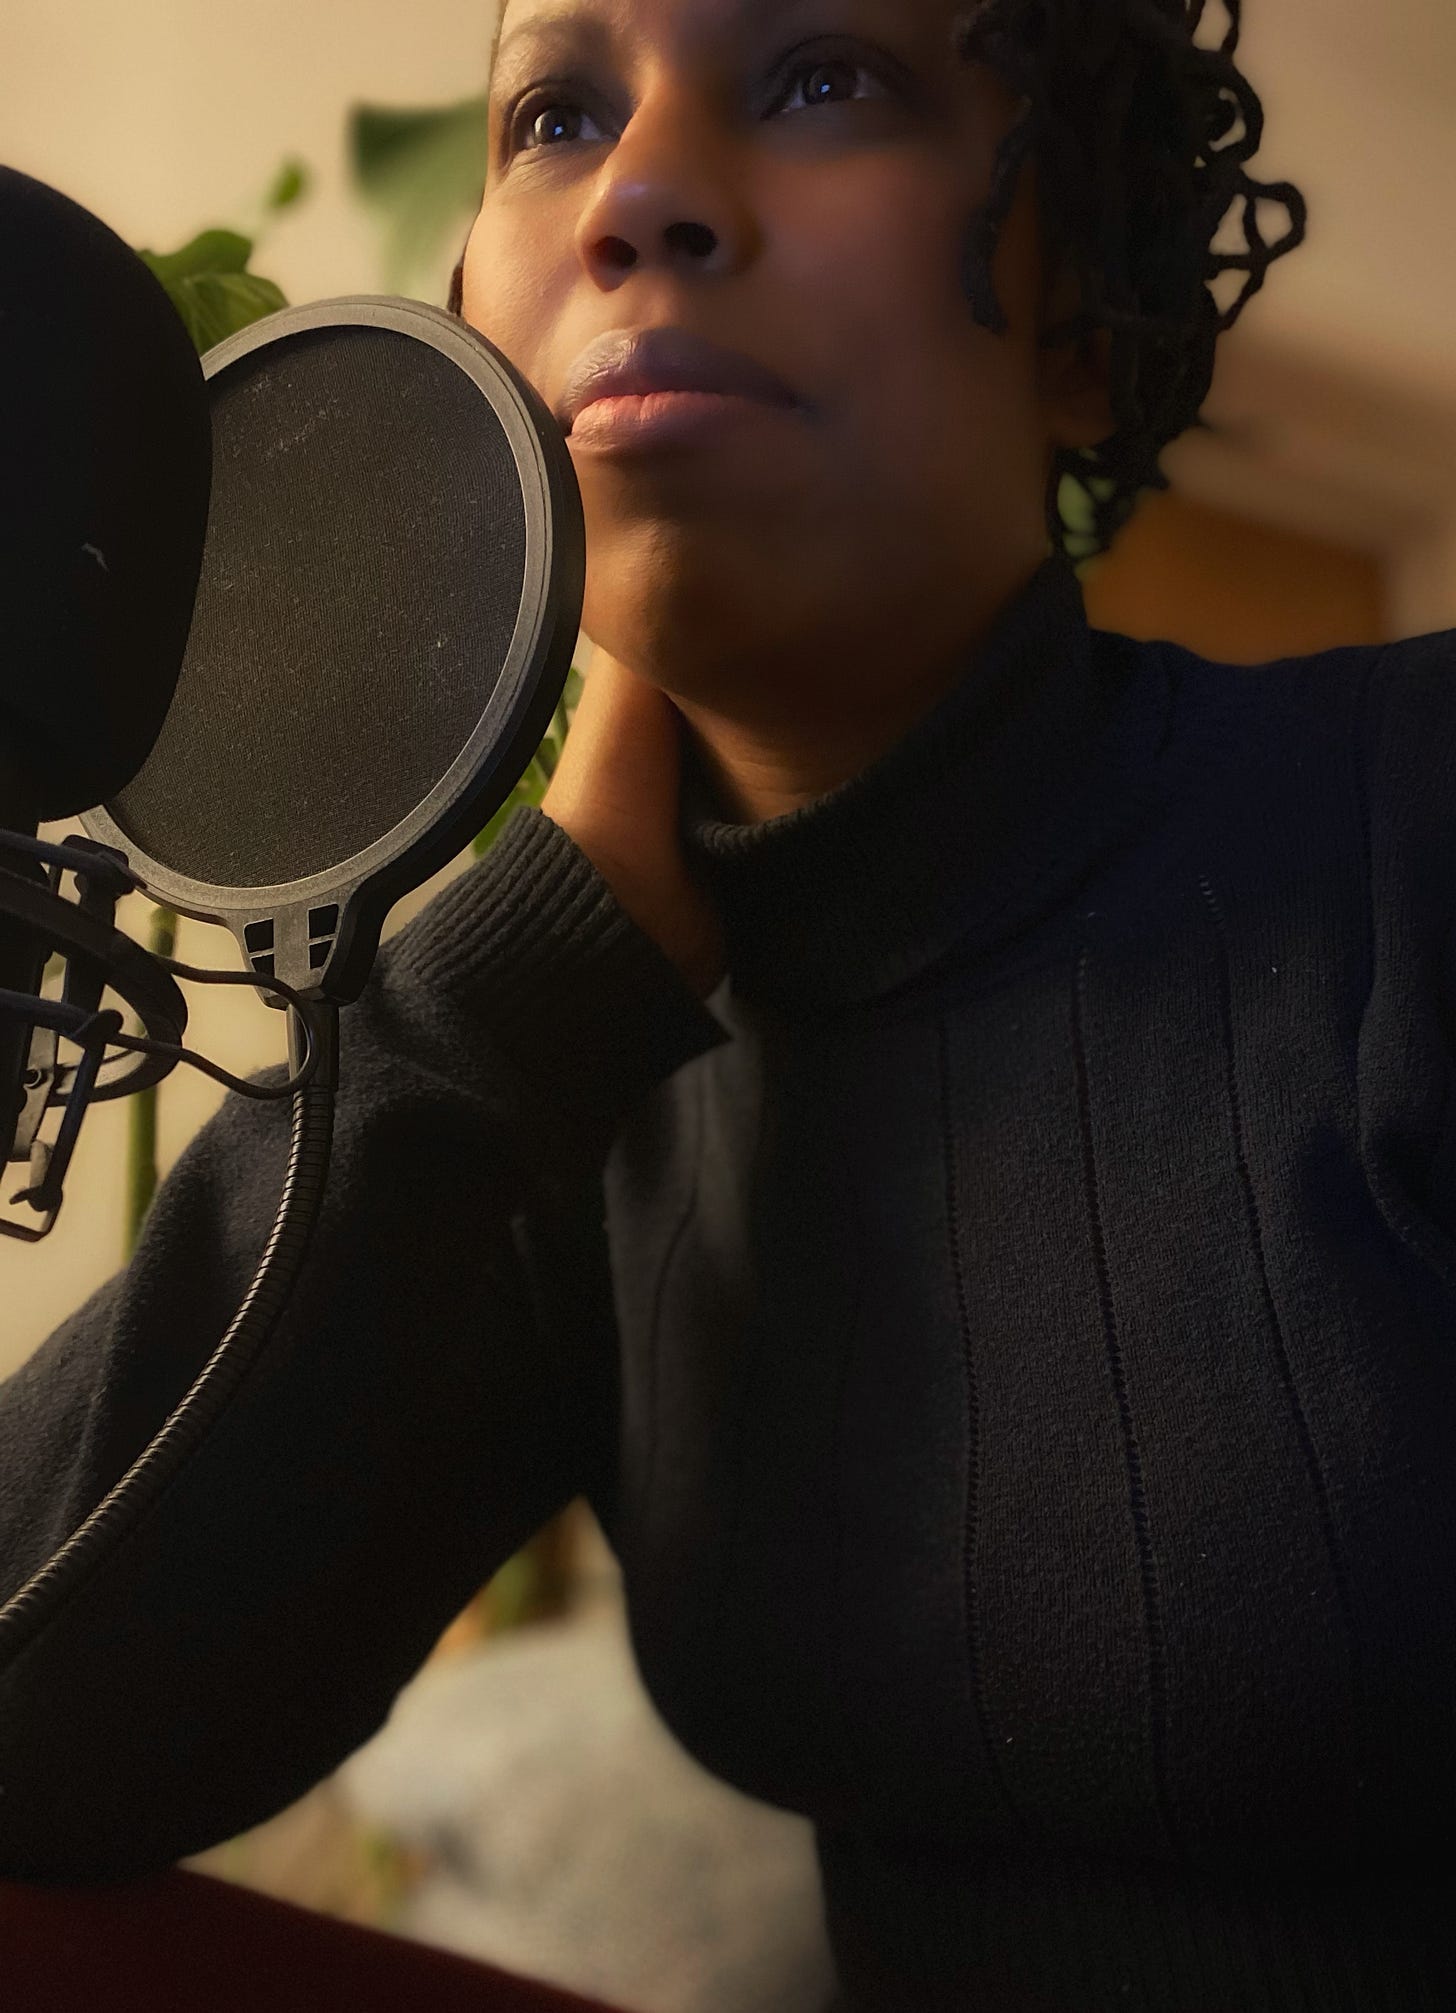 Sandra is a Black femme with short black locs, wearing a black turtleneck, sitting in front of a podcast mic